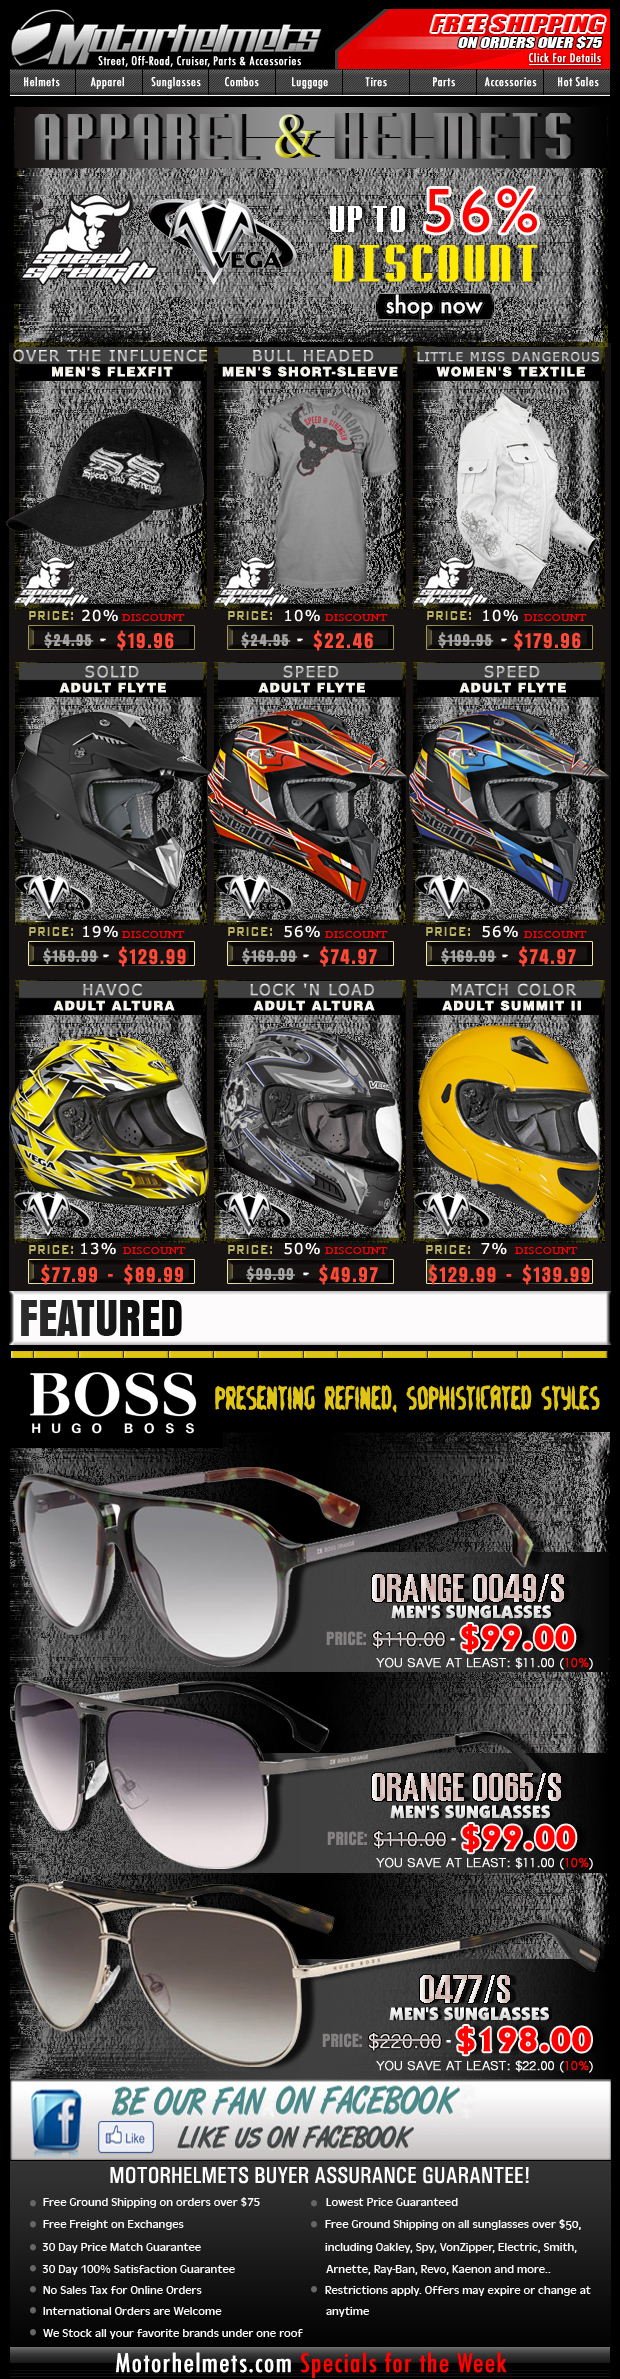 More SPRING Sale from Speed & Strength and Vega...up to 56% Discount!